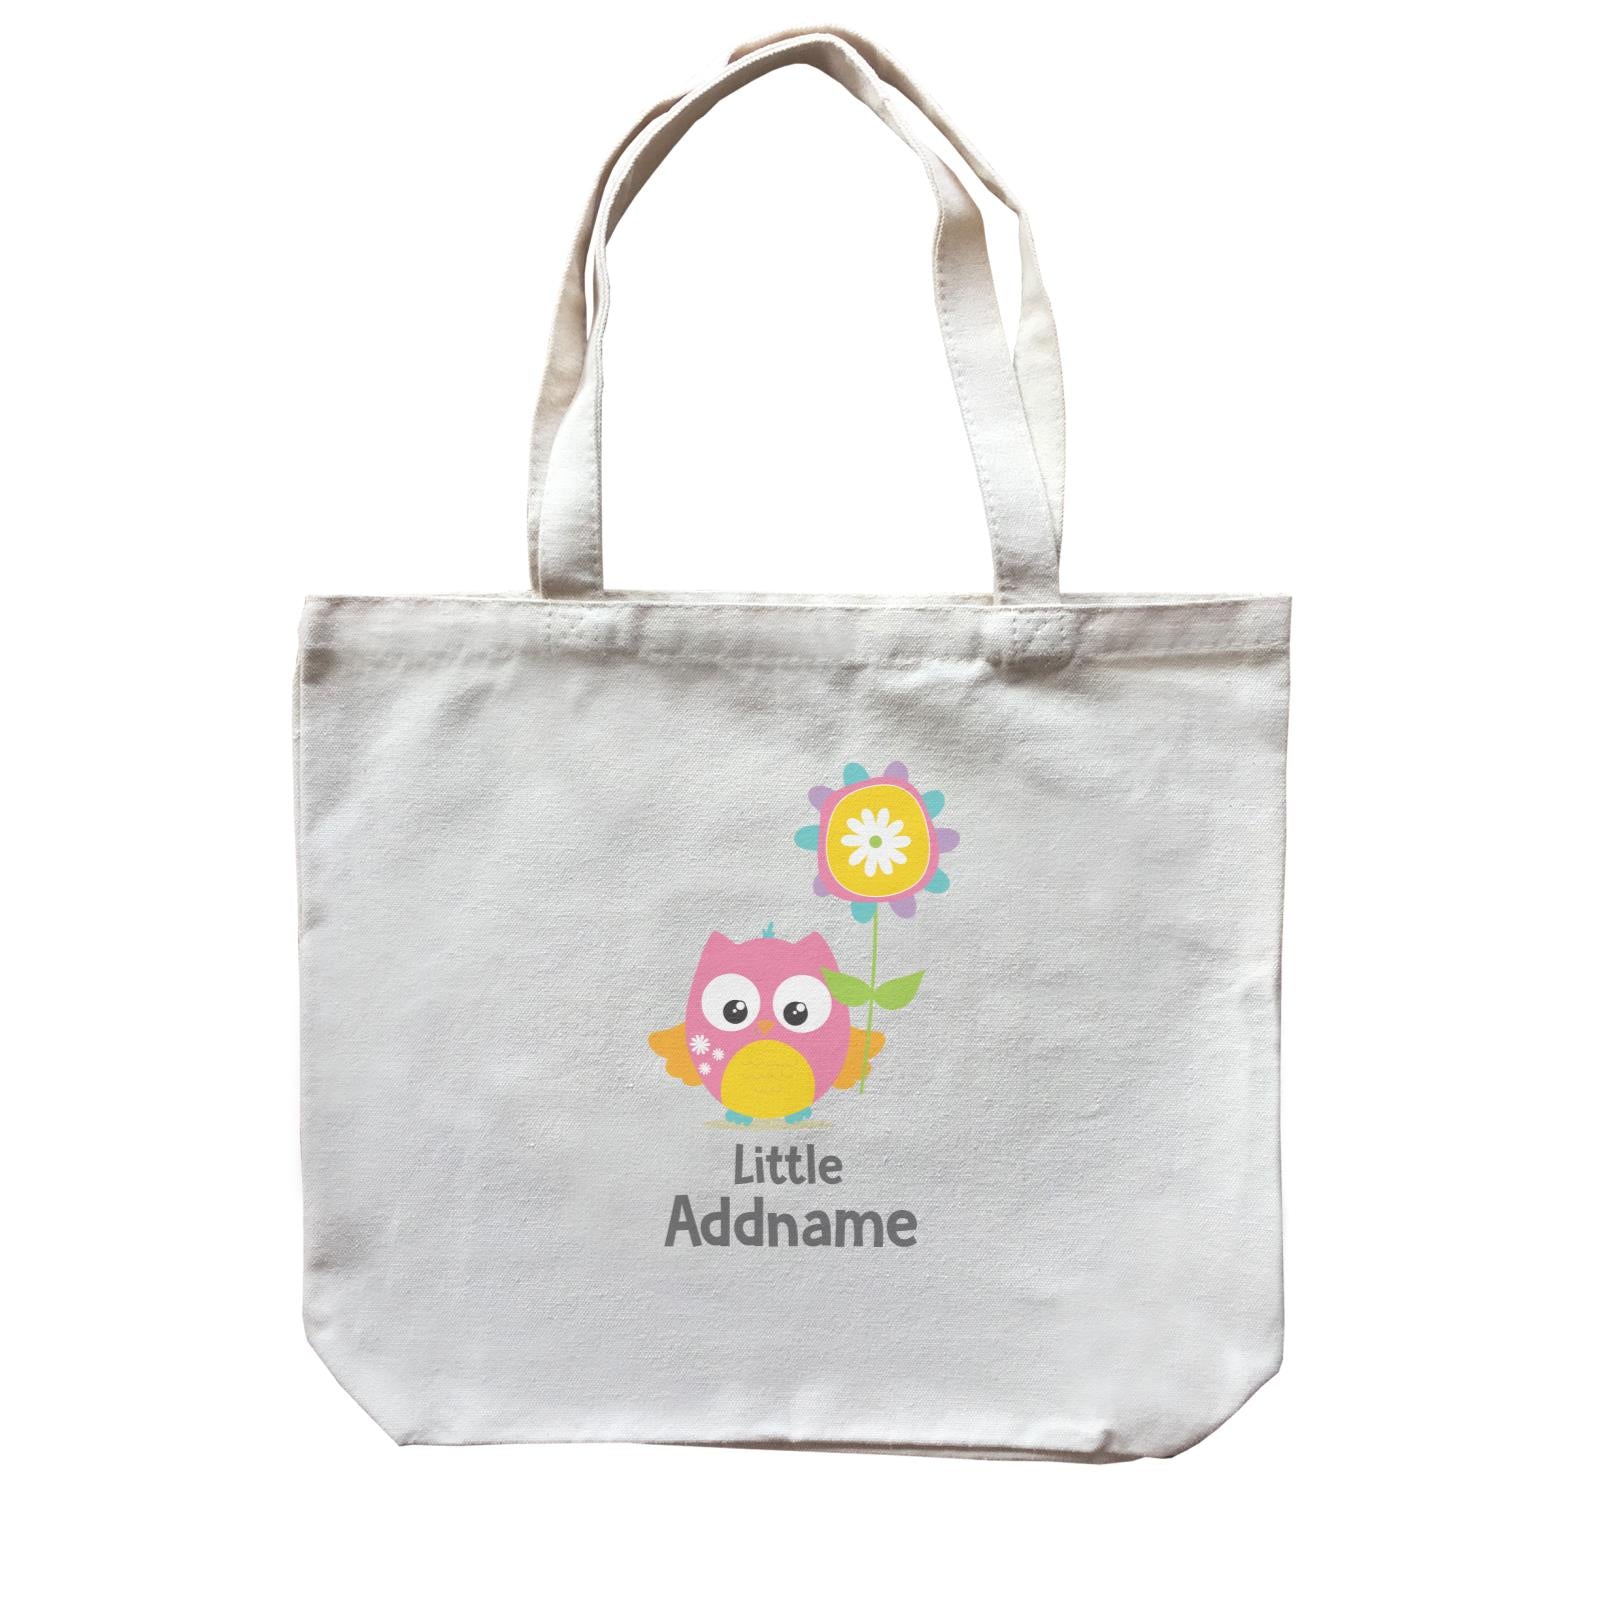 Cute Owls Pink with Flower Little Addname Canvas Bag